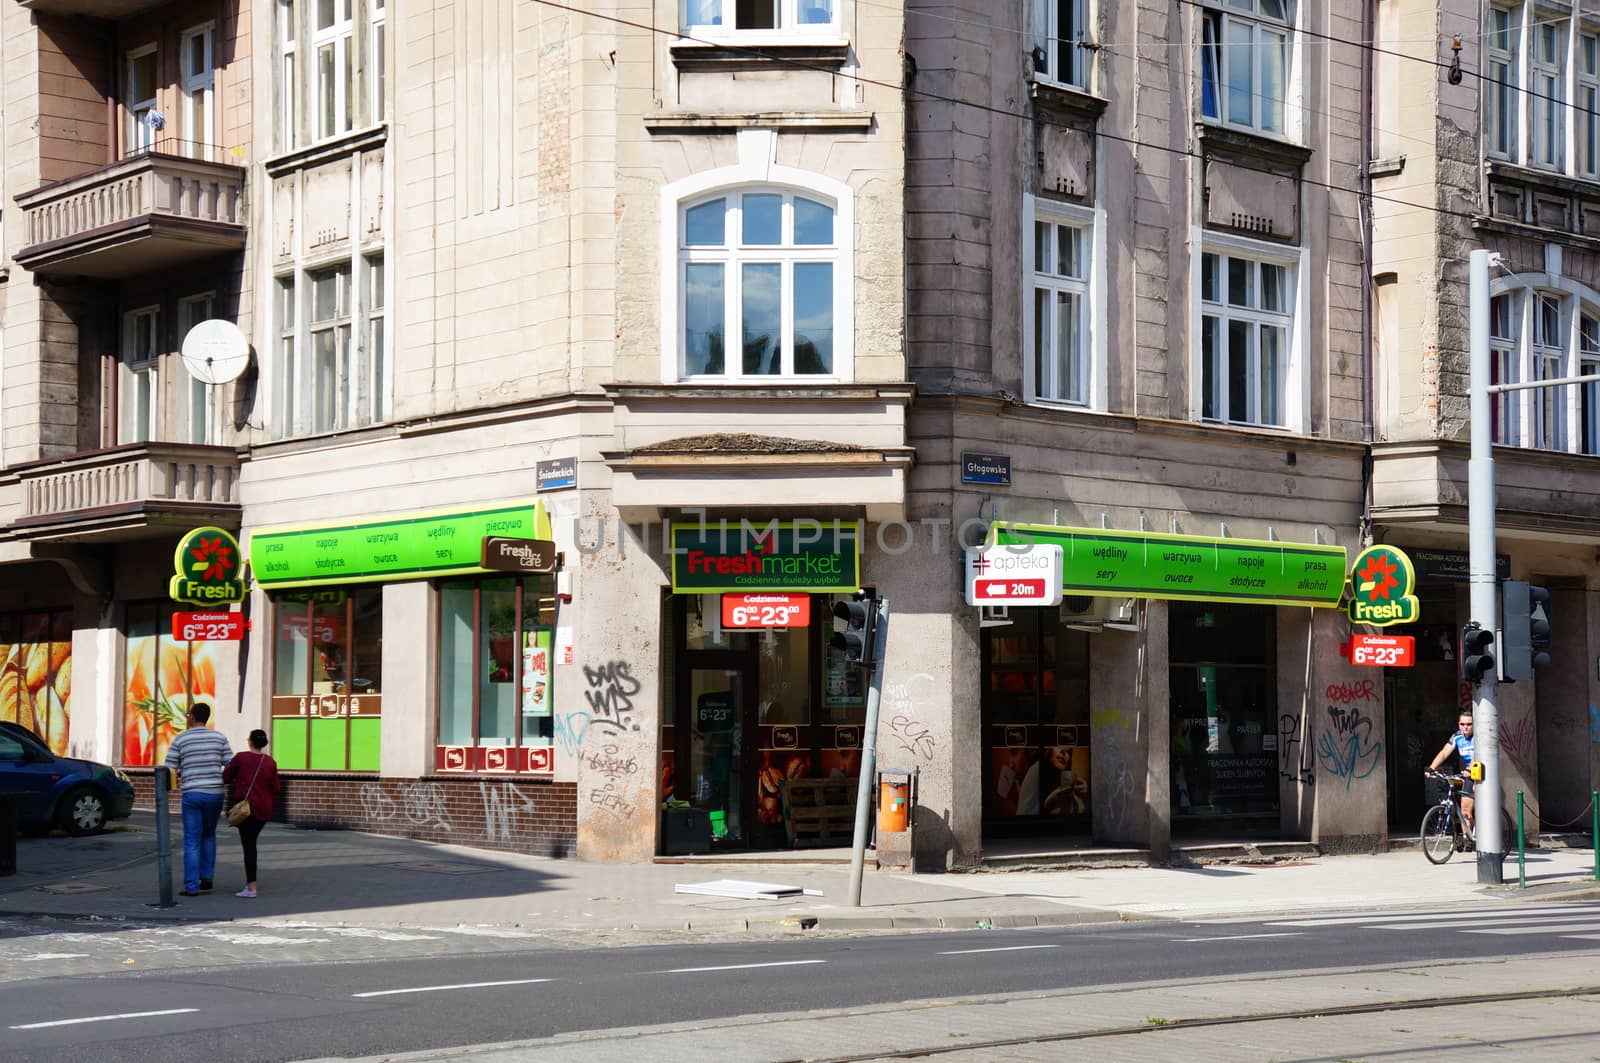 POZNAN, POLAND - AUGUST 25, 2013: Small store at a corner of the Glogowska street